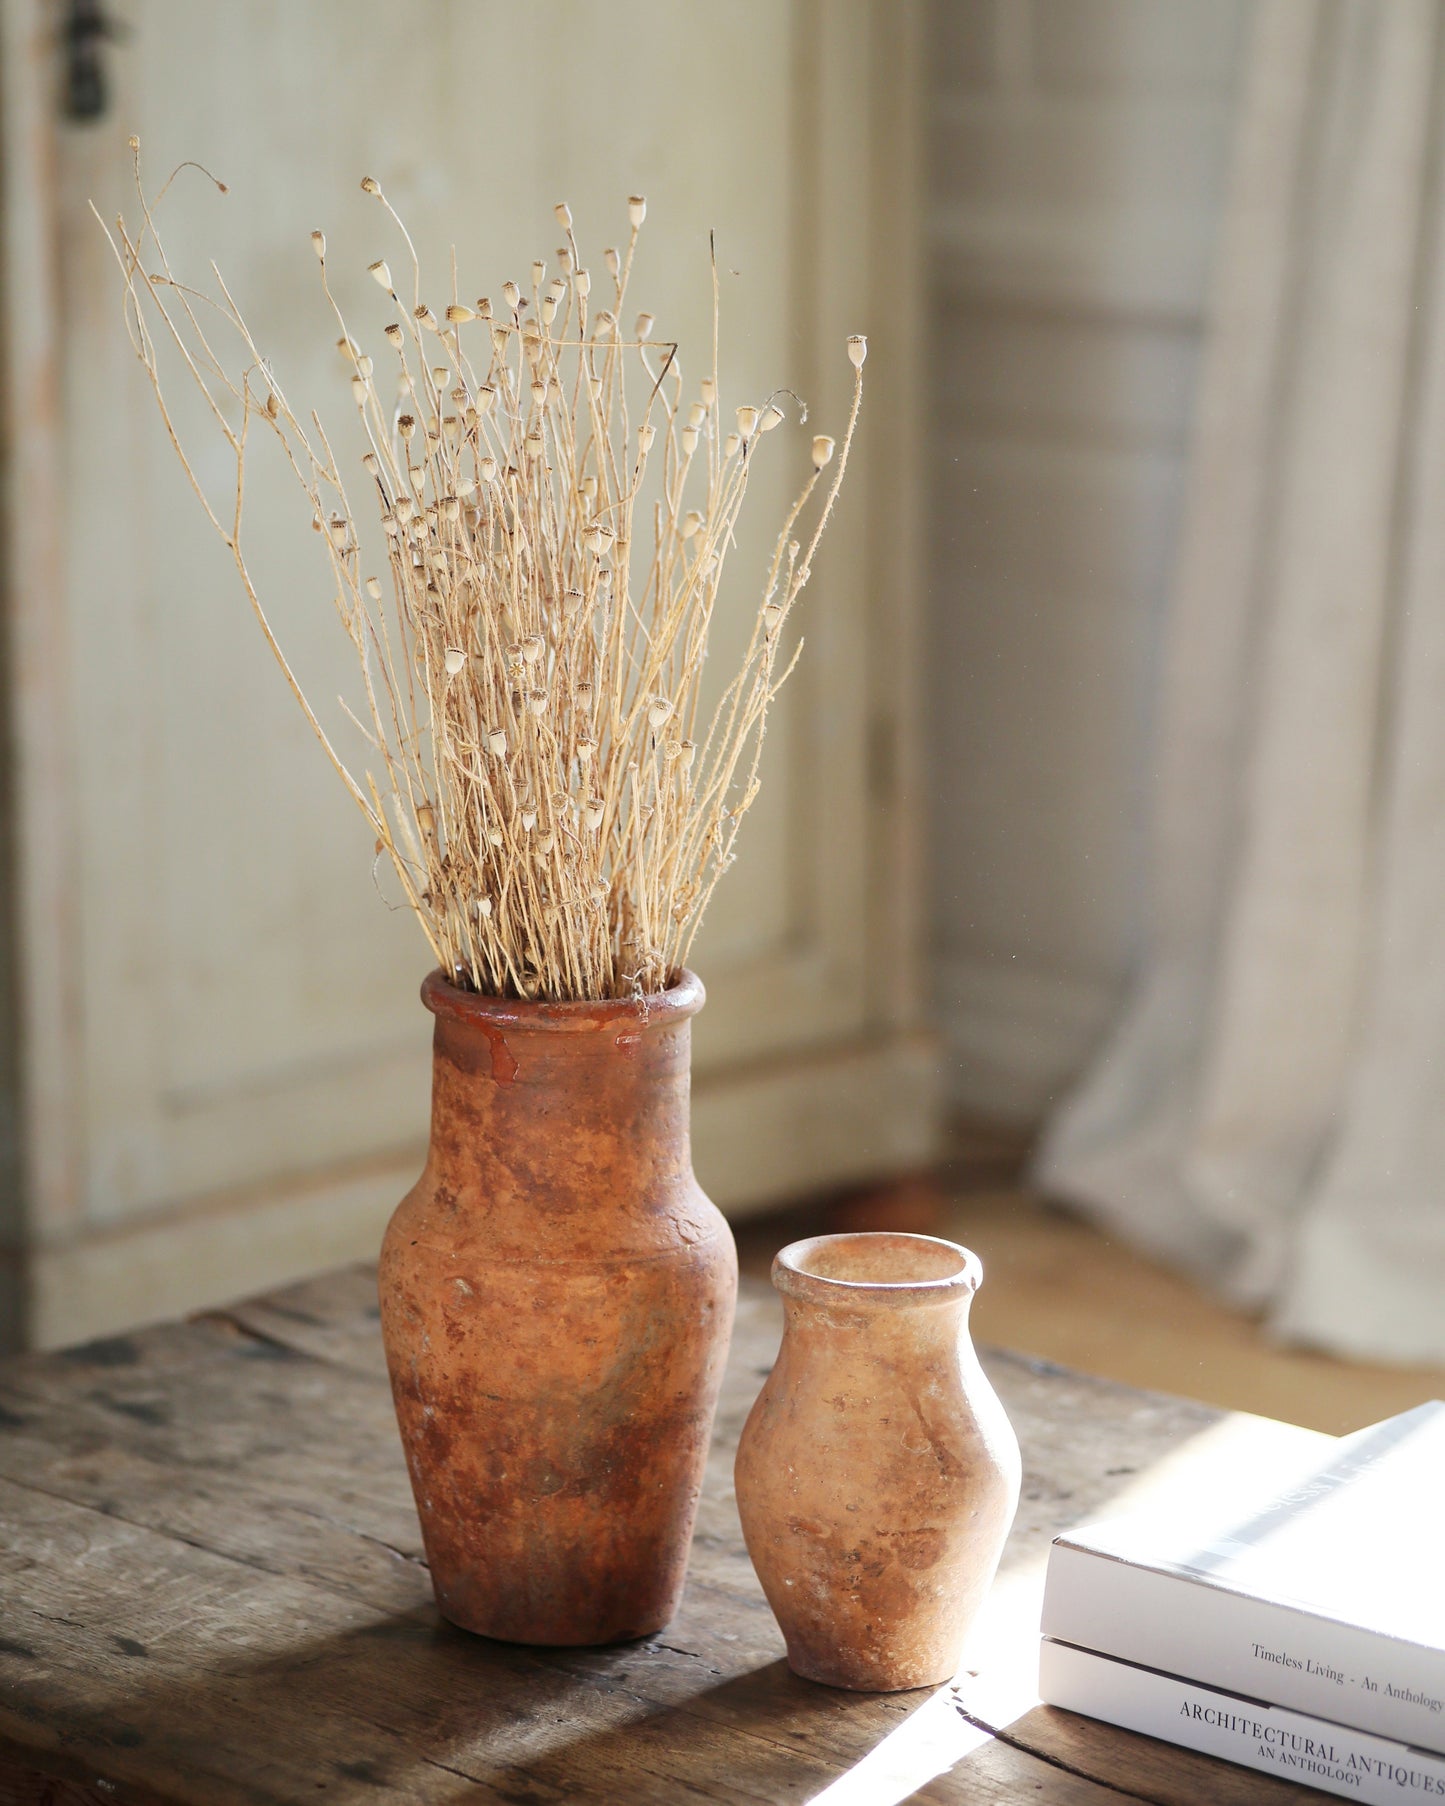 Antique terracotta toned vases on coffee table with dried flowers